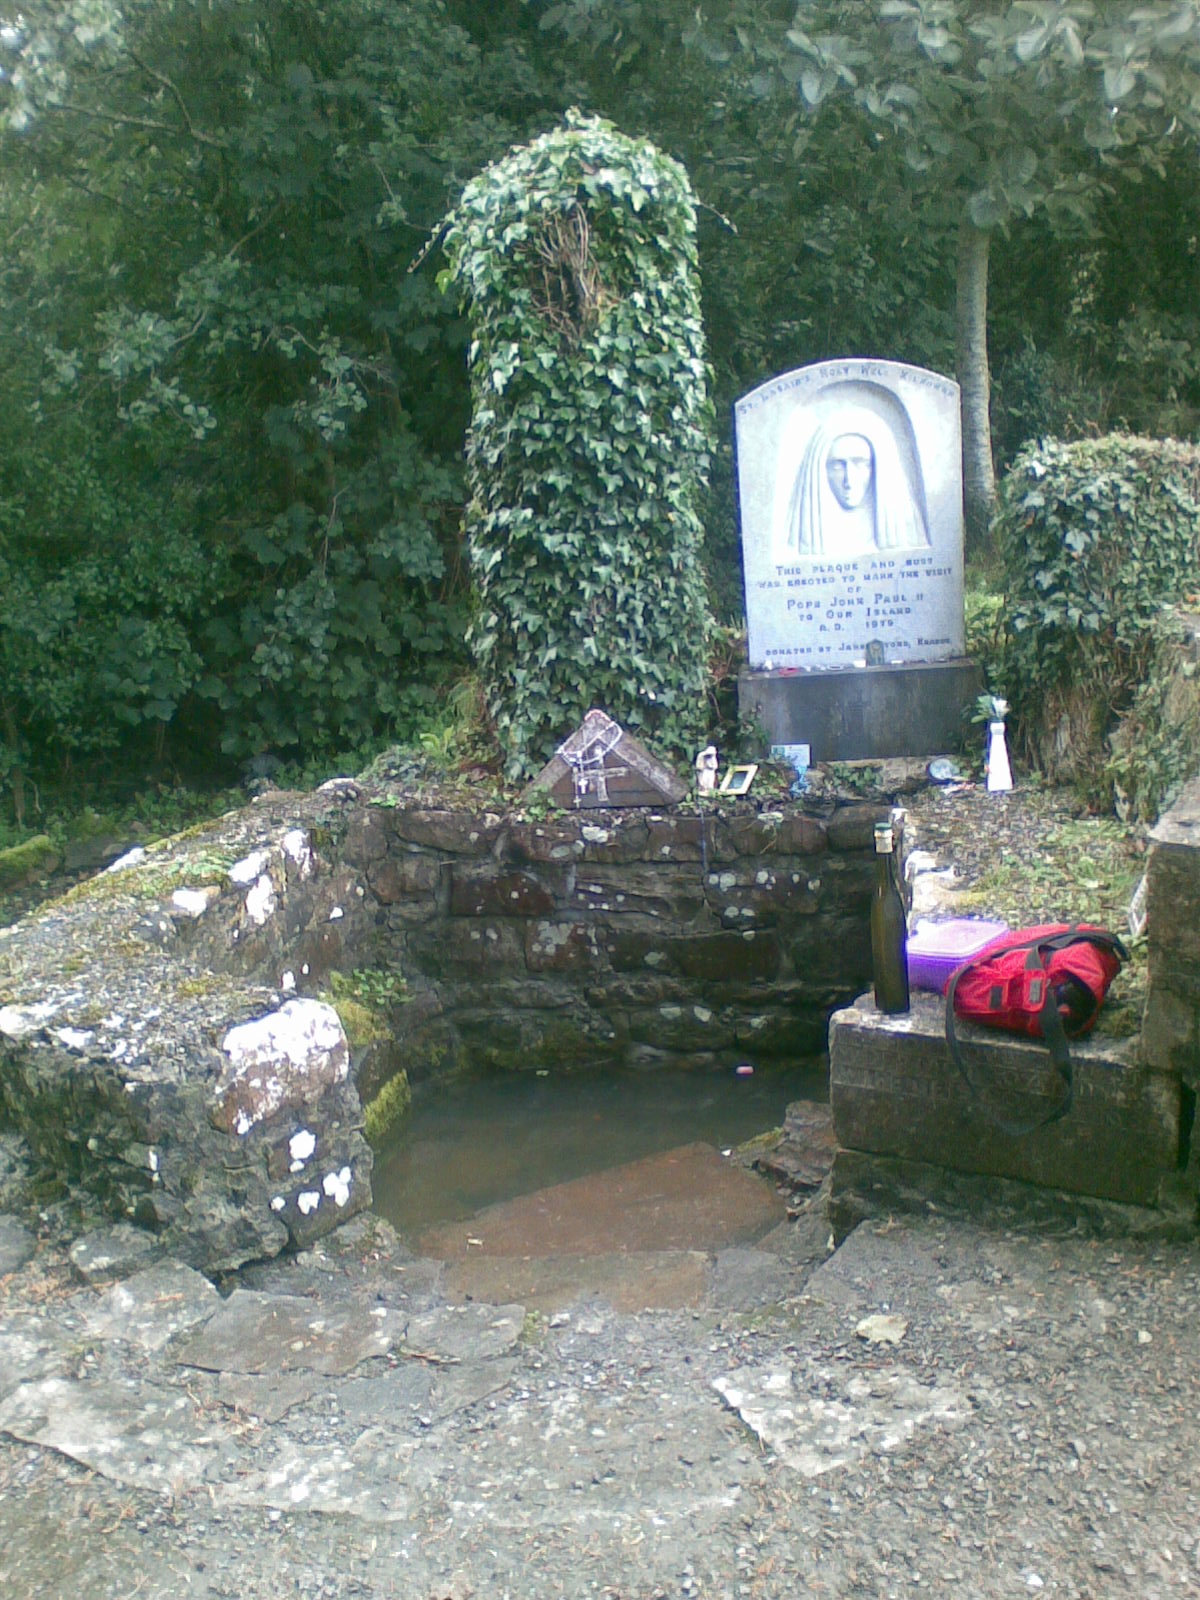 St. Lassair's Well, including the stump of the tree which had coins hammered into its bark